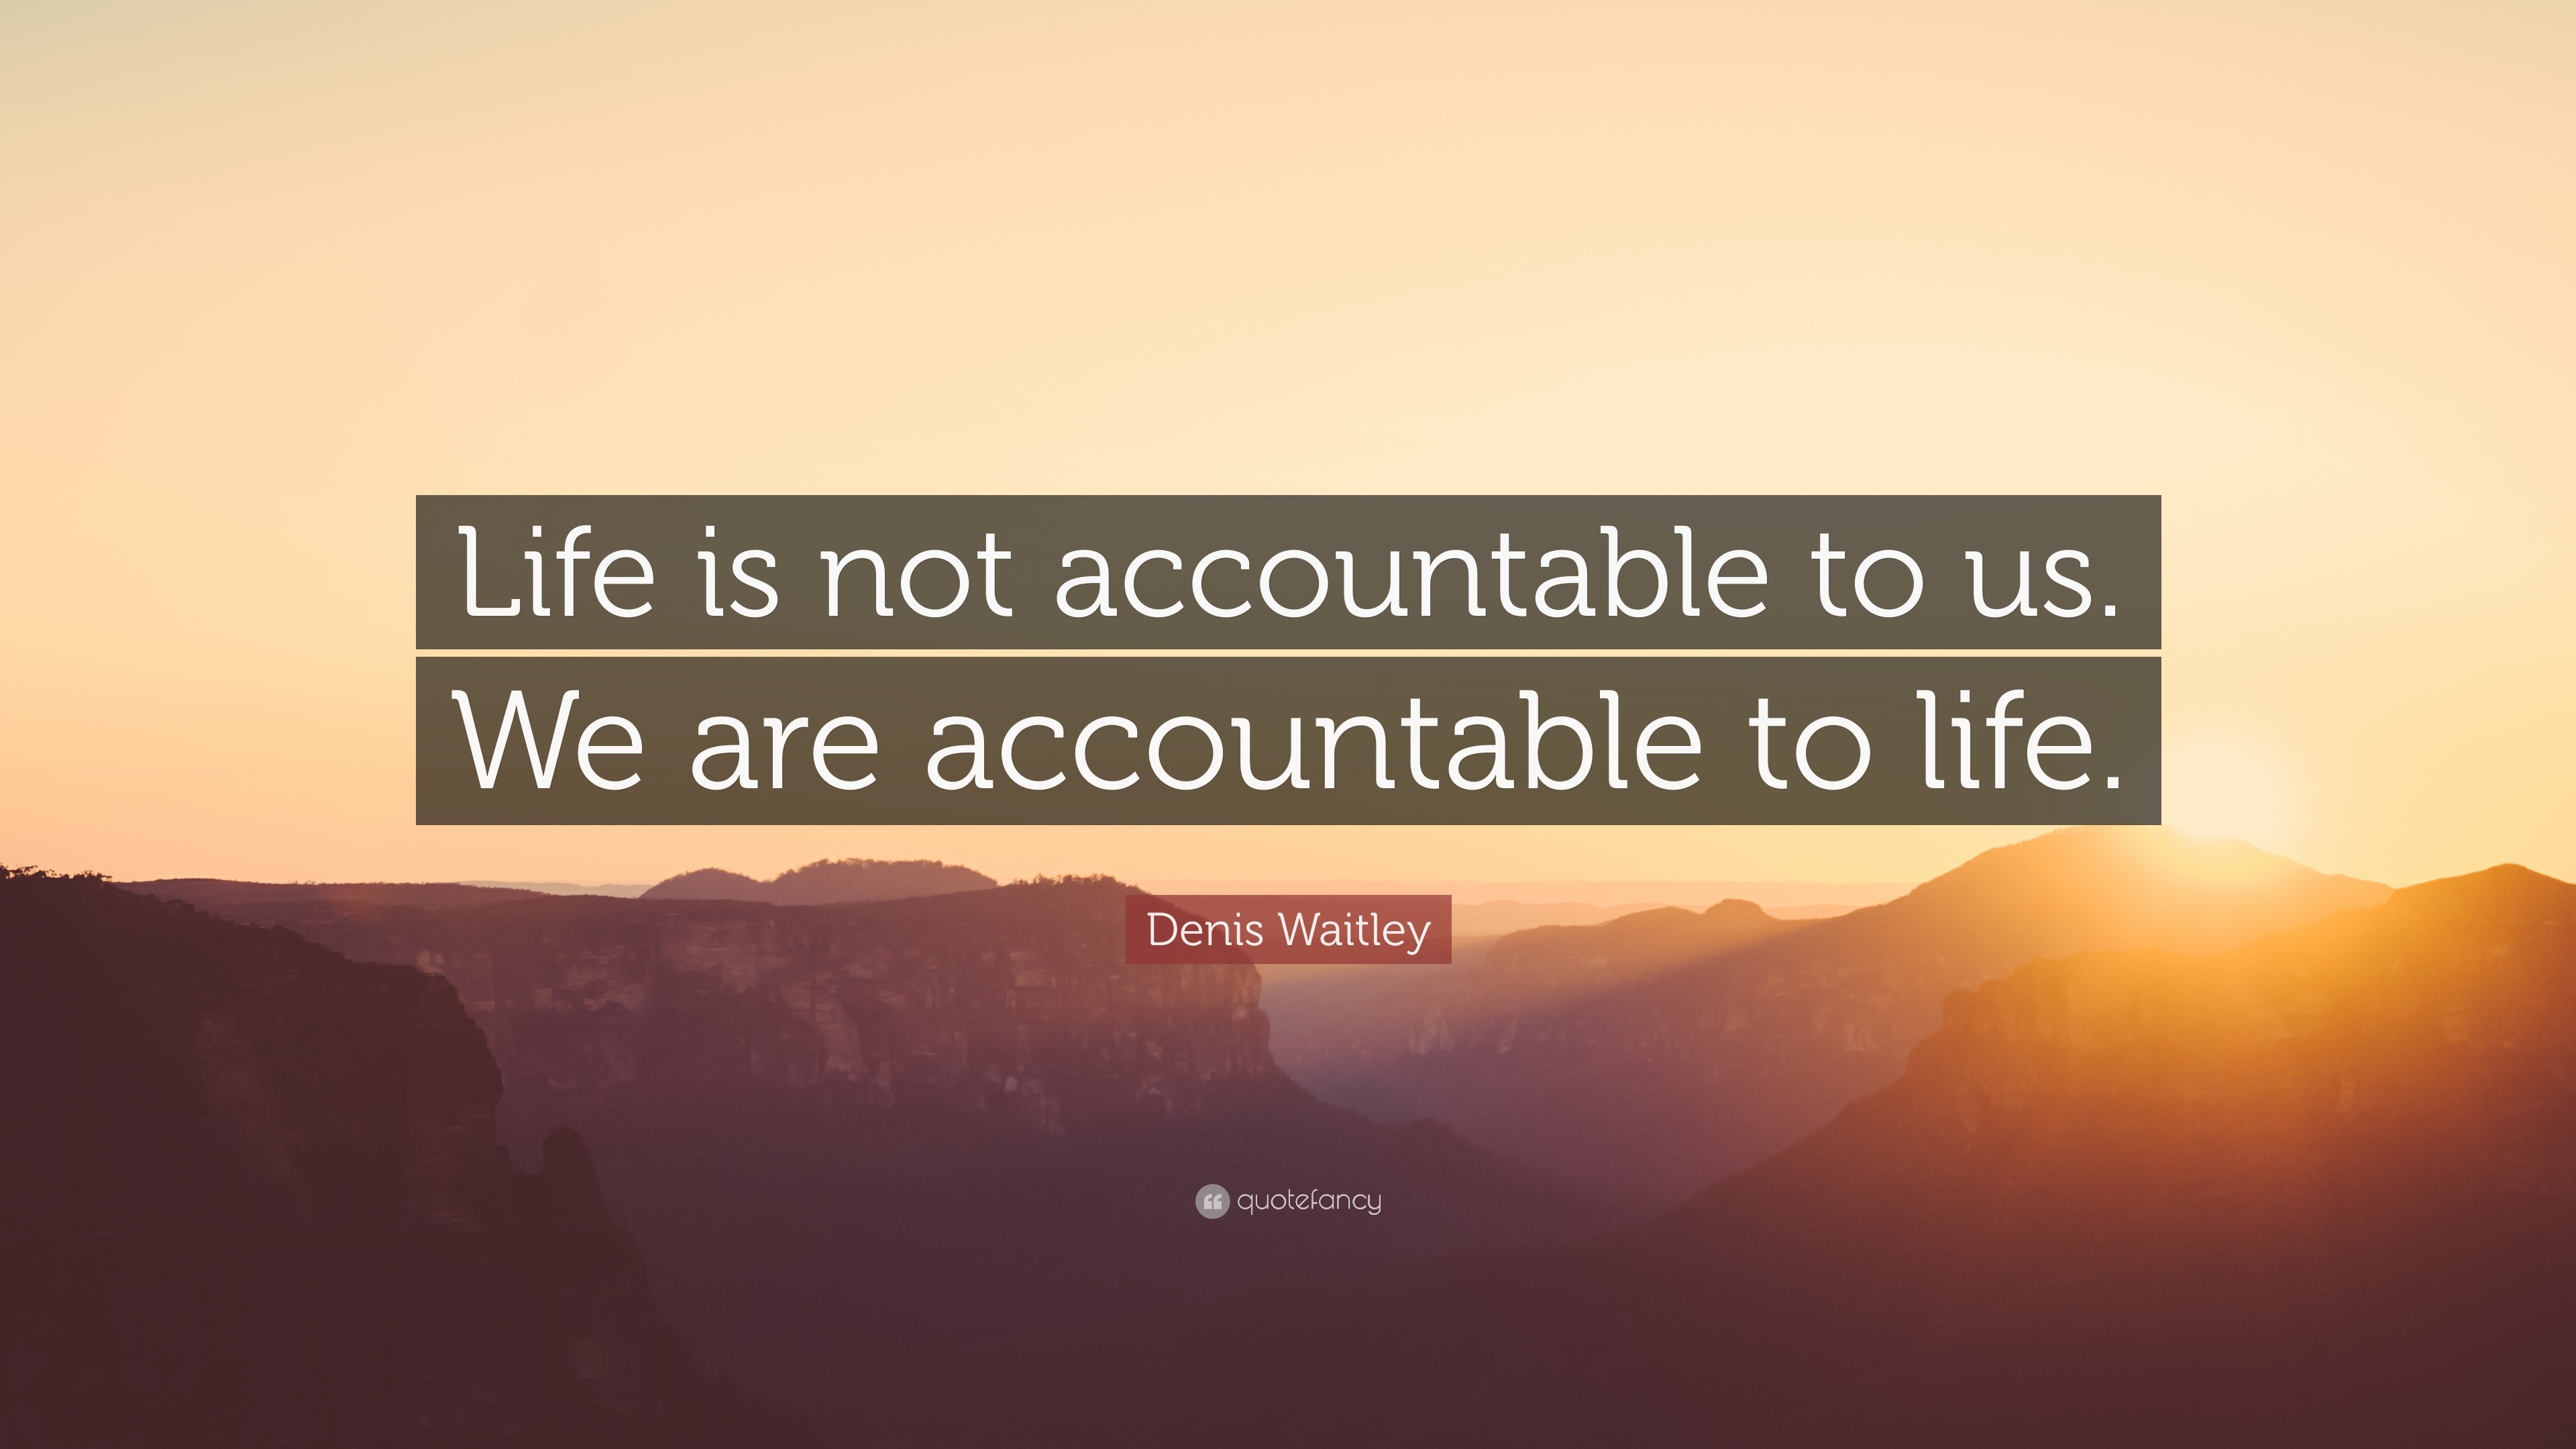 Denis Waitley Quote: “Life is not accountable to us. We are accountable ...